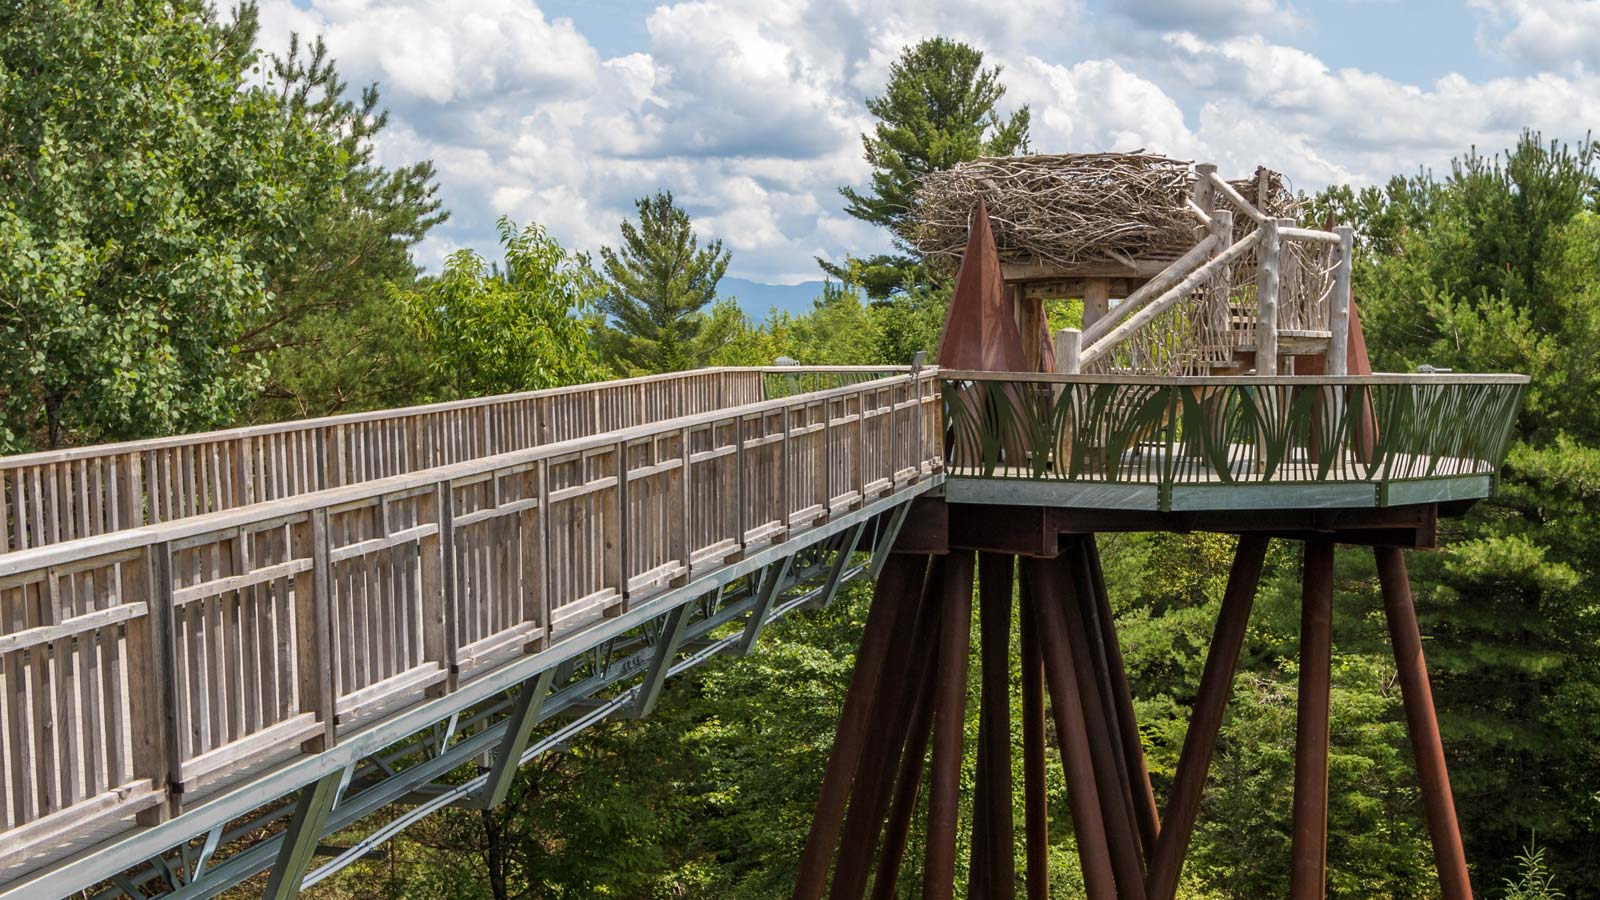 Experience the Wild Center New York and discover why this is the Wildest Adirondack Adventure Center in Upstate New York.